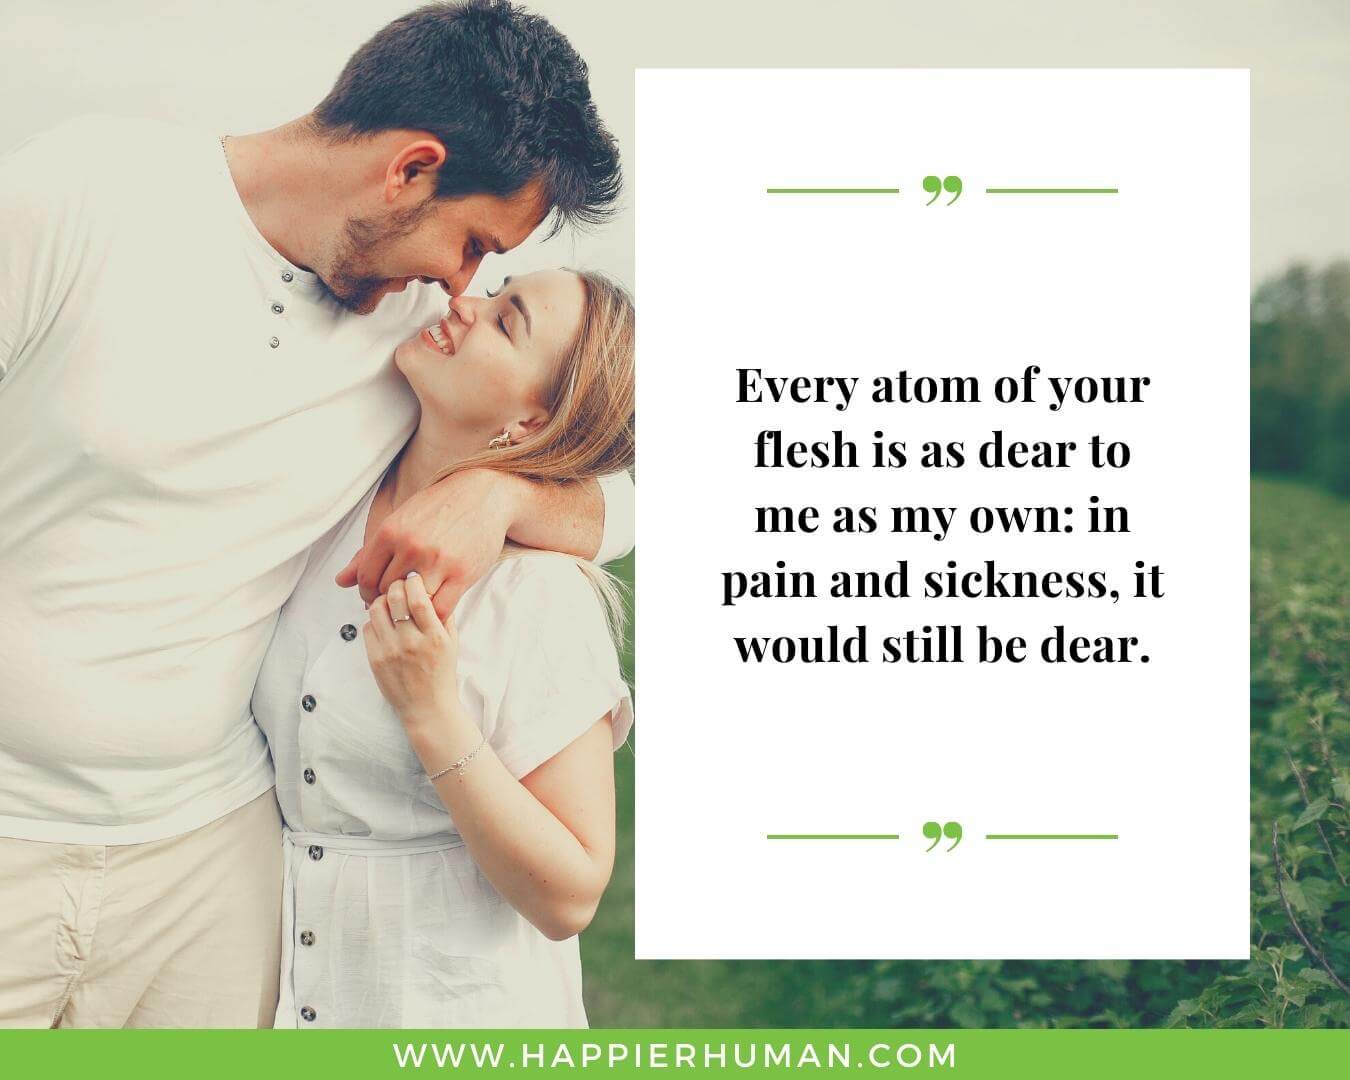 Motivating Love Quotes for Her - “Every atom of your flesh is as dear to me as my own: in pain and sickness, it would still be dear.”